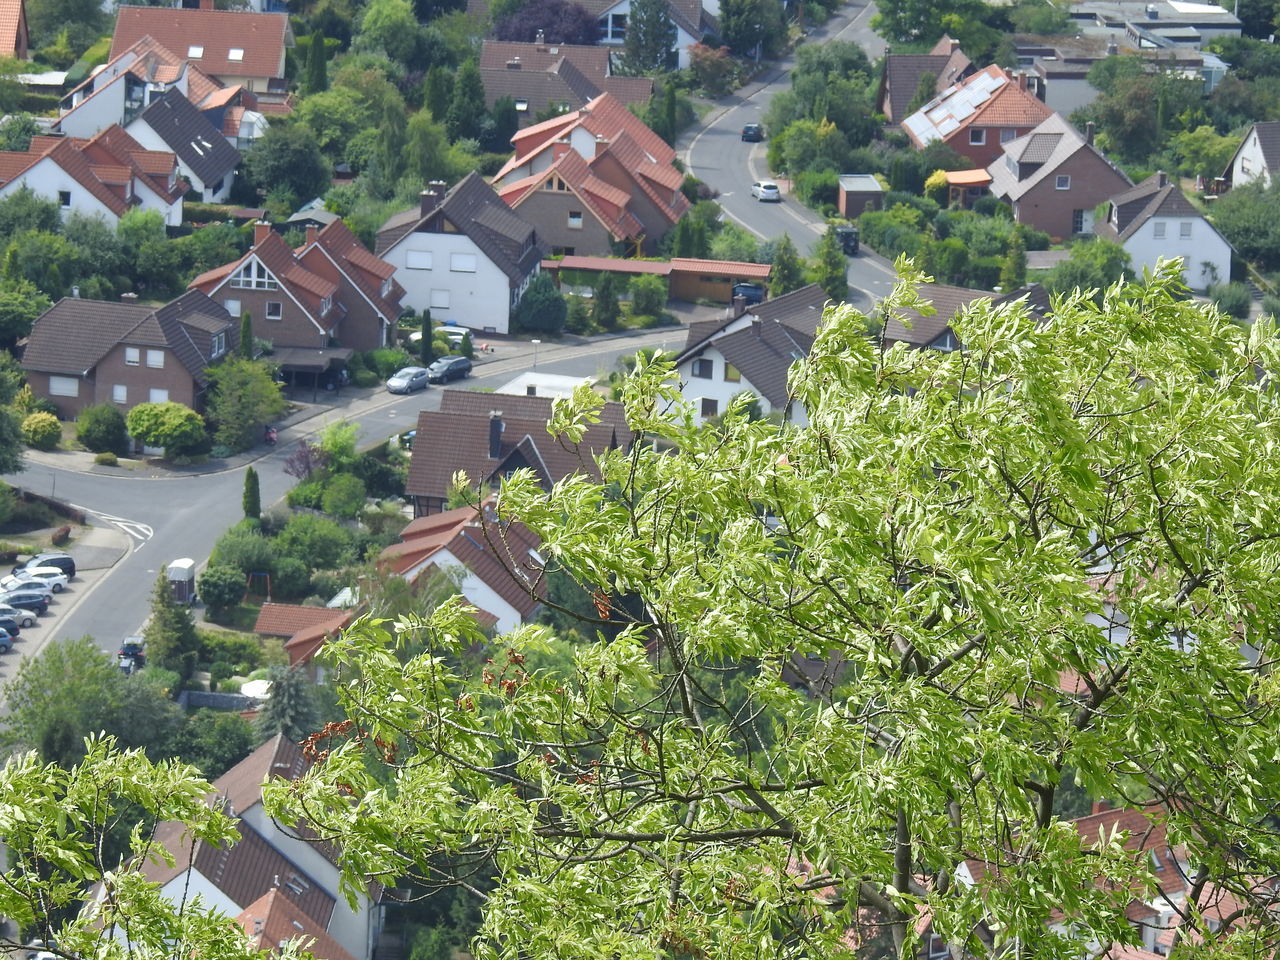 HIGH ANGLE VIEW OF TOWNSCAPE AND TREES